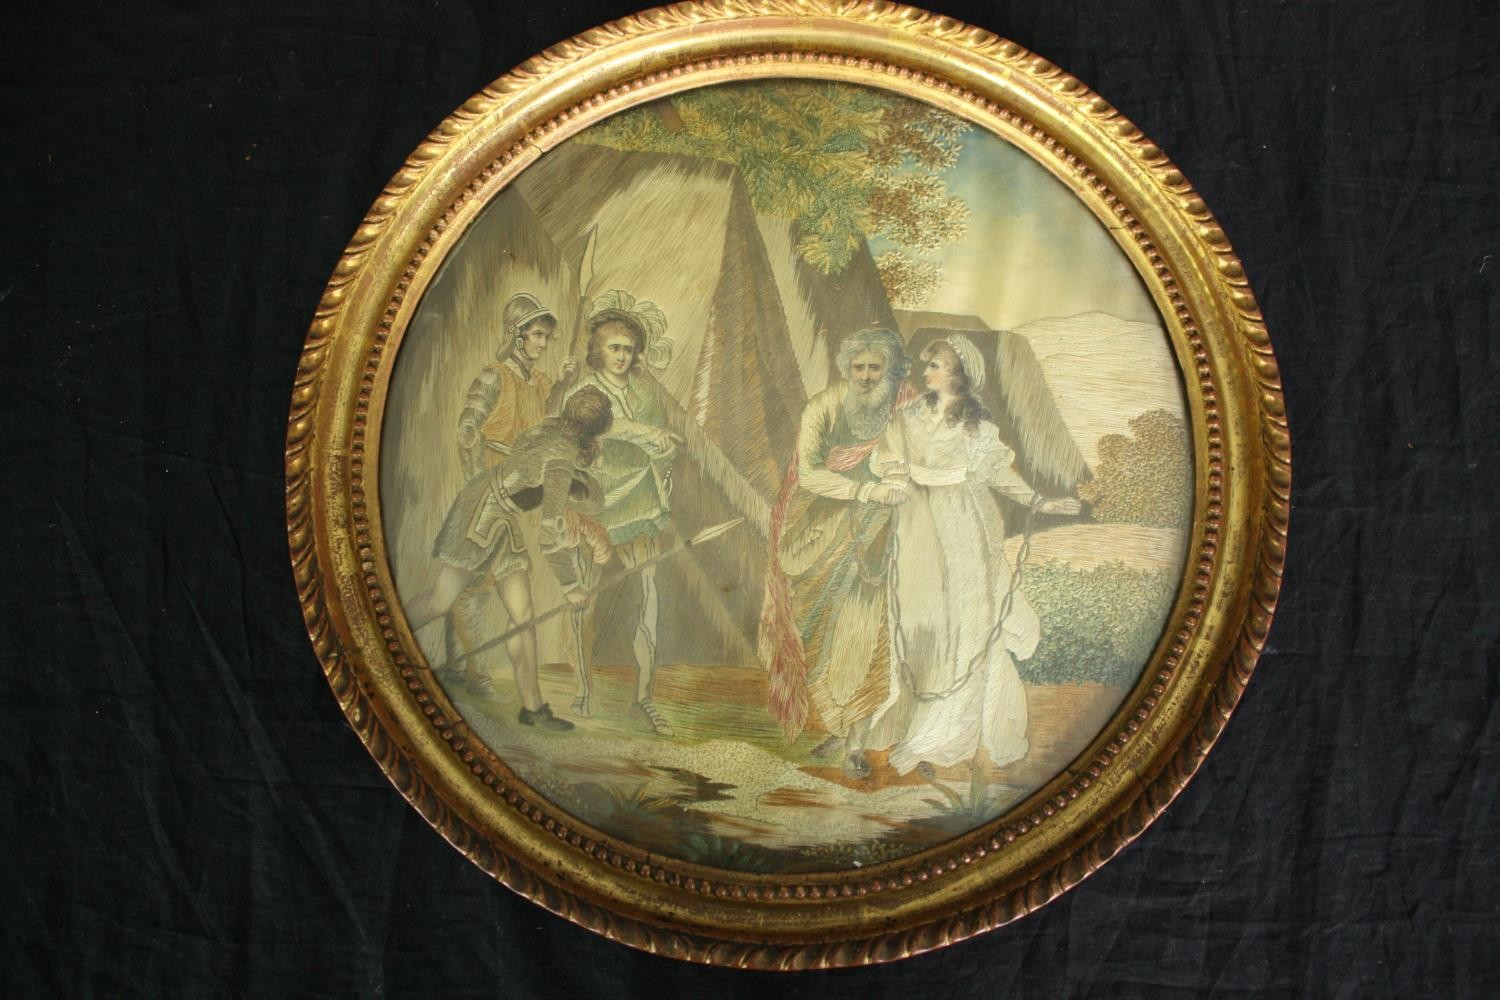 A late 19th century framed and glazed silk embroidery; King Lear, Act V, Scene III. Inscription